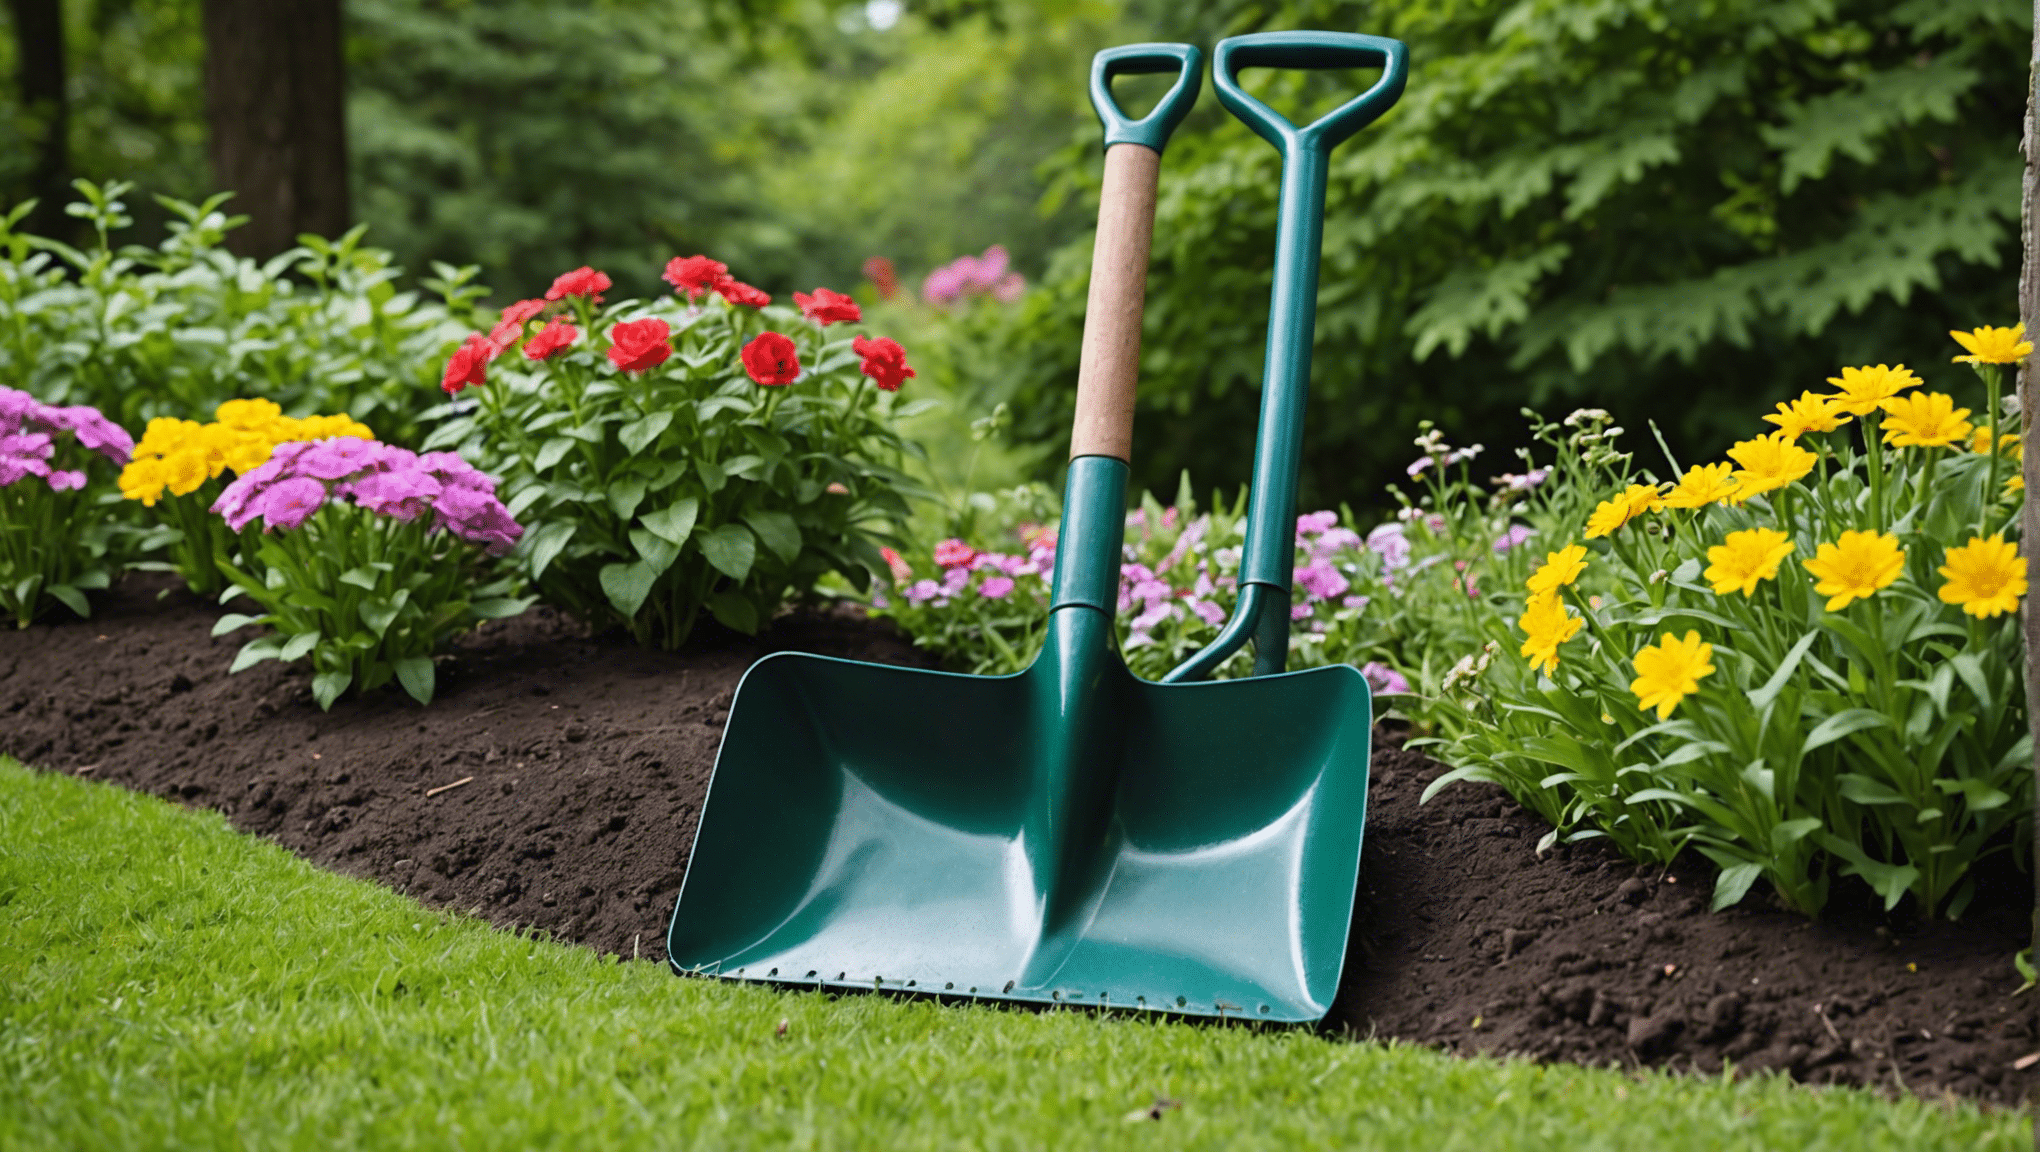 explore the ideal small gardening shovel for your gardening needs and discover the ultimate tool for your gardening projects.